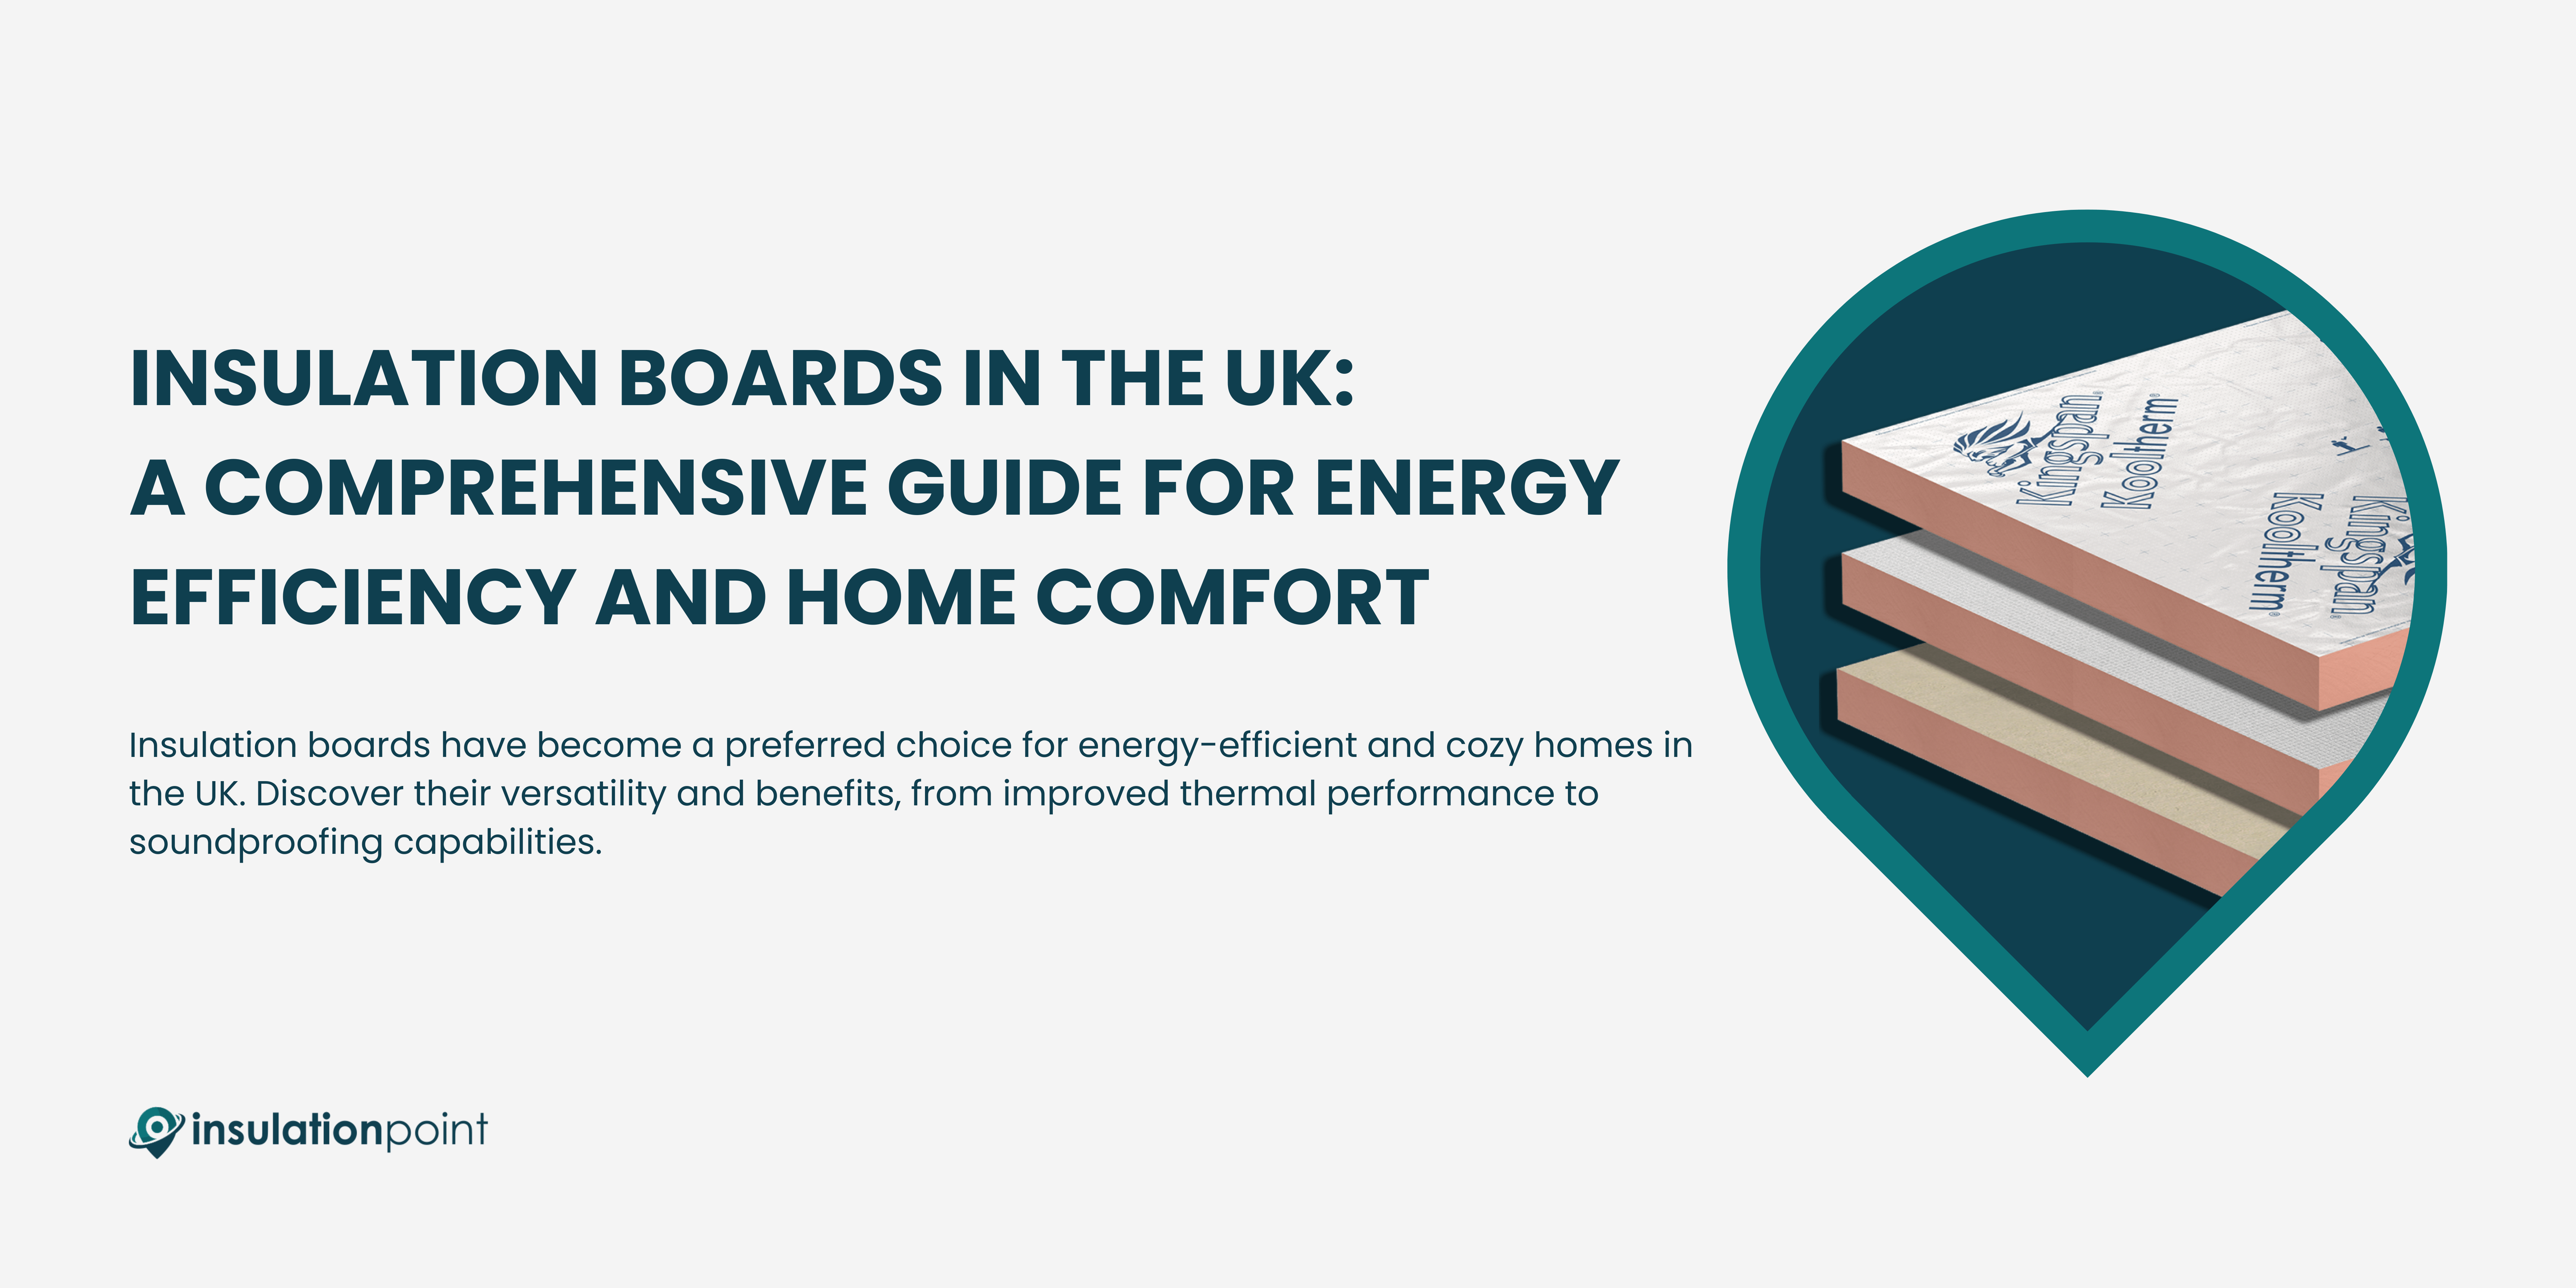 Insulation Boards in the UK: A Comprehensive Guide for Energy Efficiency and Home Comfort